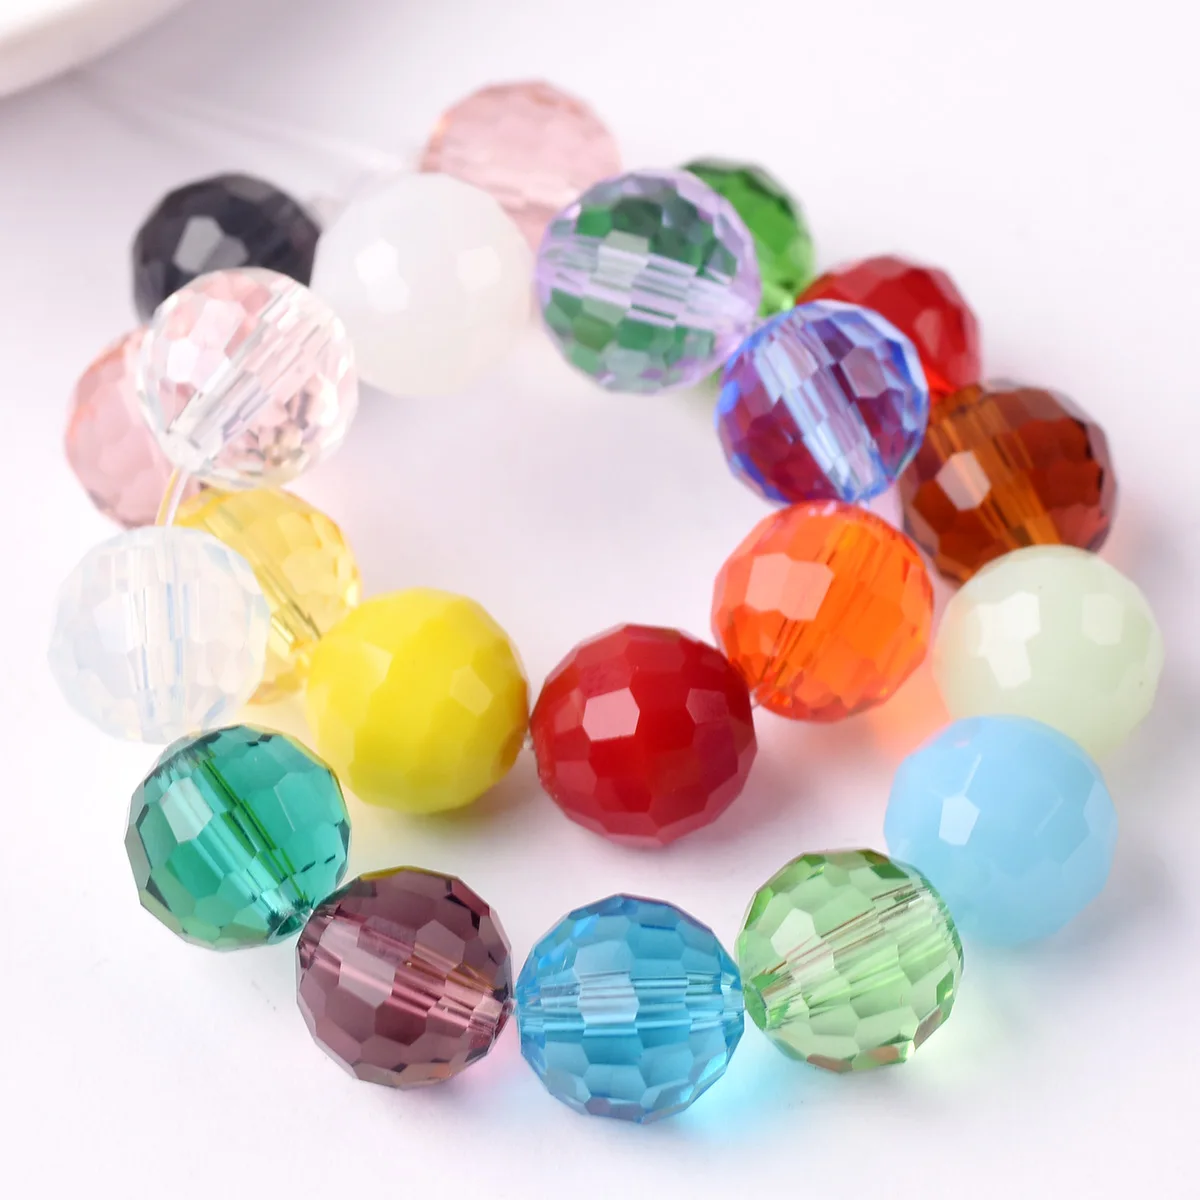 Round 96 Facets 6mm 8mm 10mm 12mm Faceted Crystal Glass Loose Spacer Beads Wholesale Bulk Lot For Jewelry Making Findings 200pcs 4mm round opaque glass loose spacer beads wholesale bulk lot for jewelry making diy crafts findings